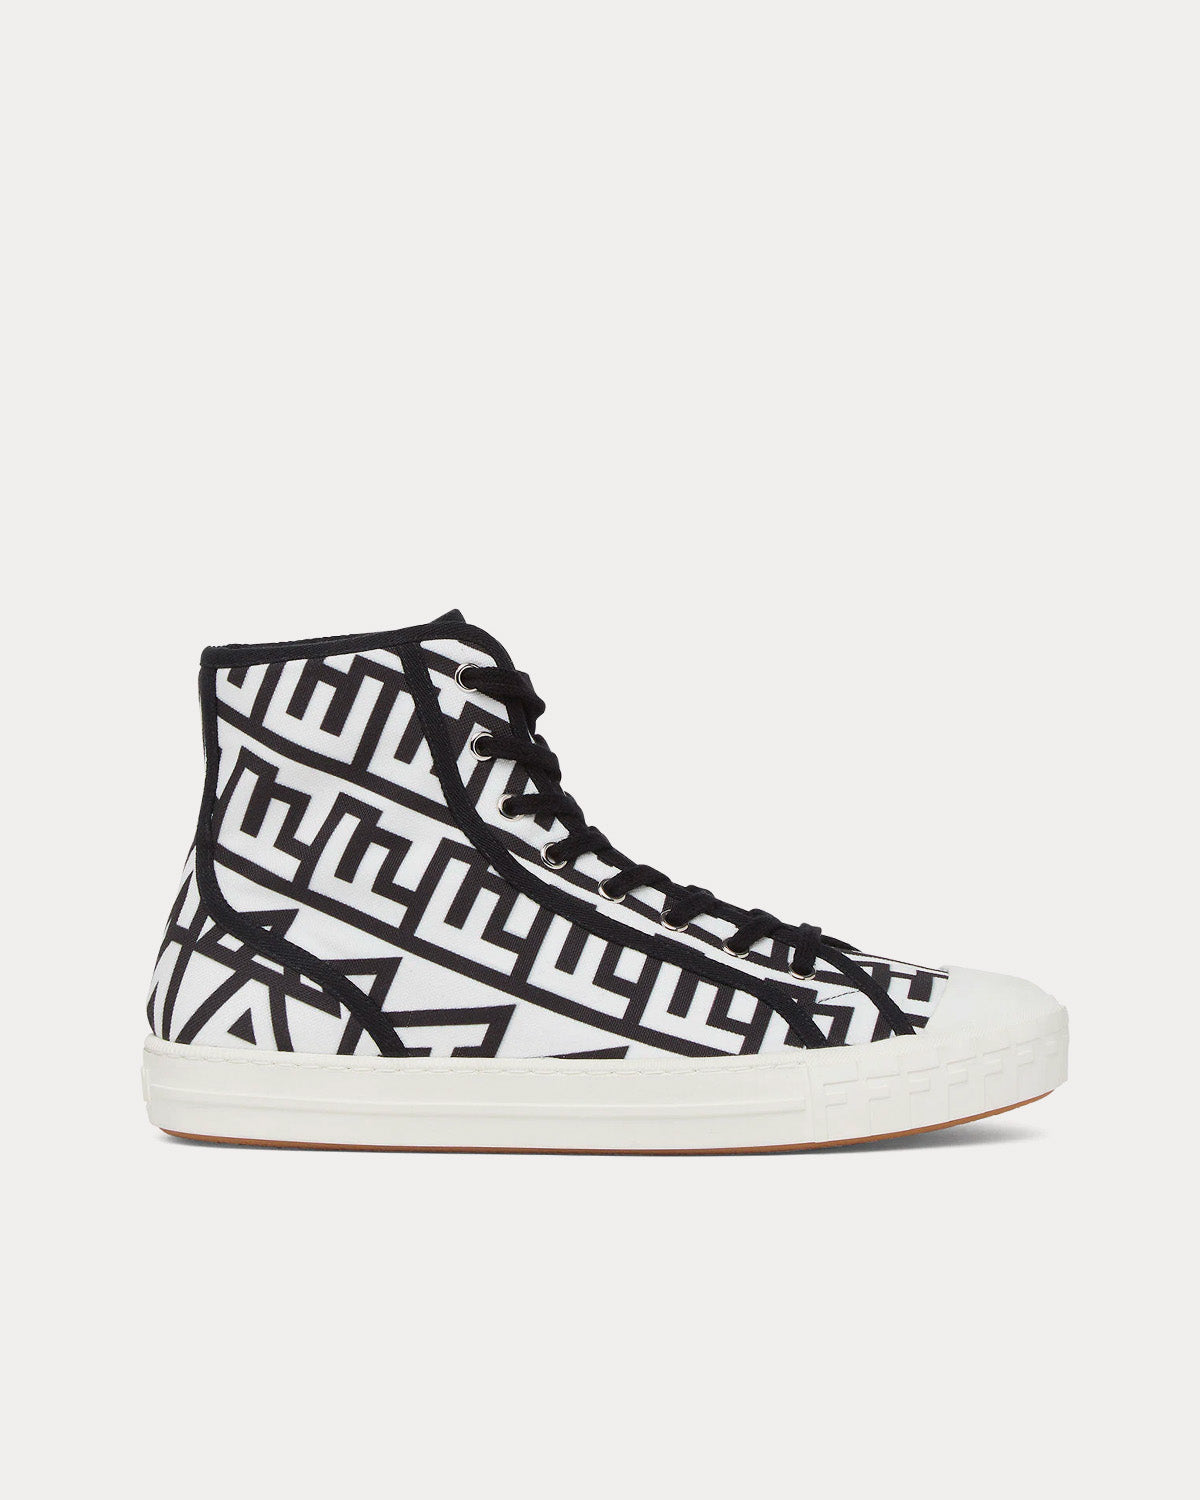 Domino Two-Tone Canvas White / Black High Top Sneakers